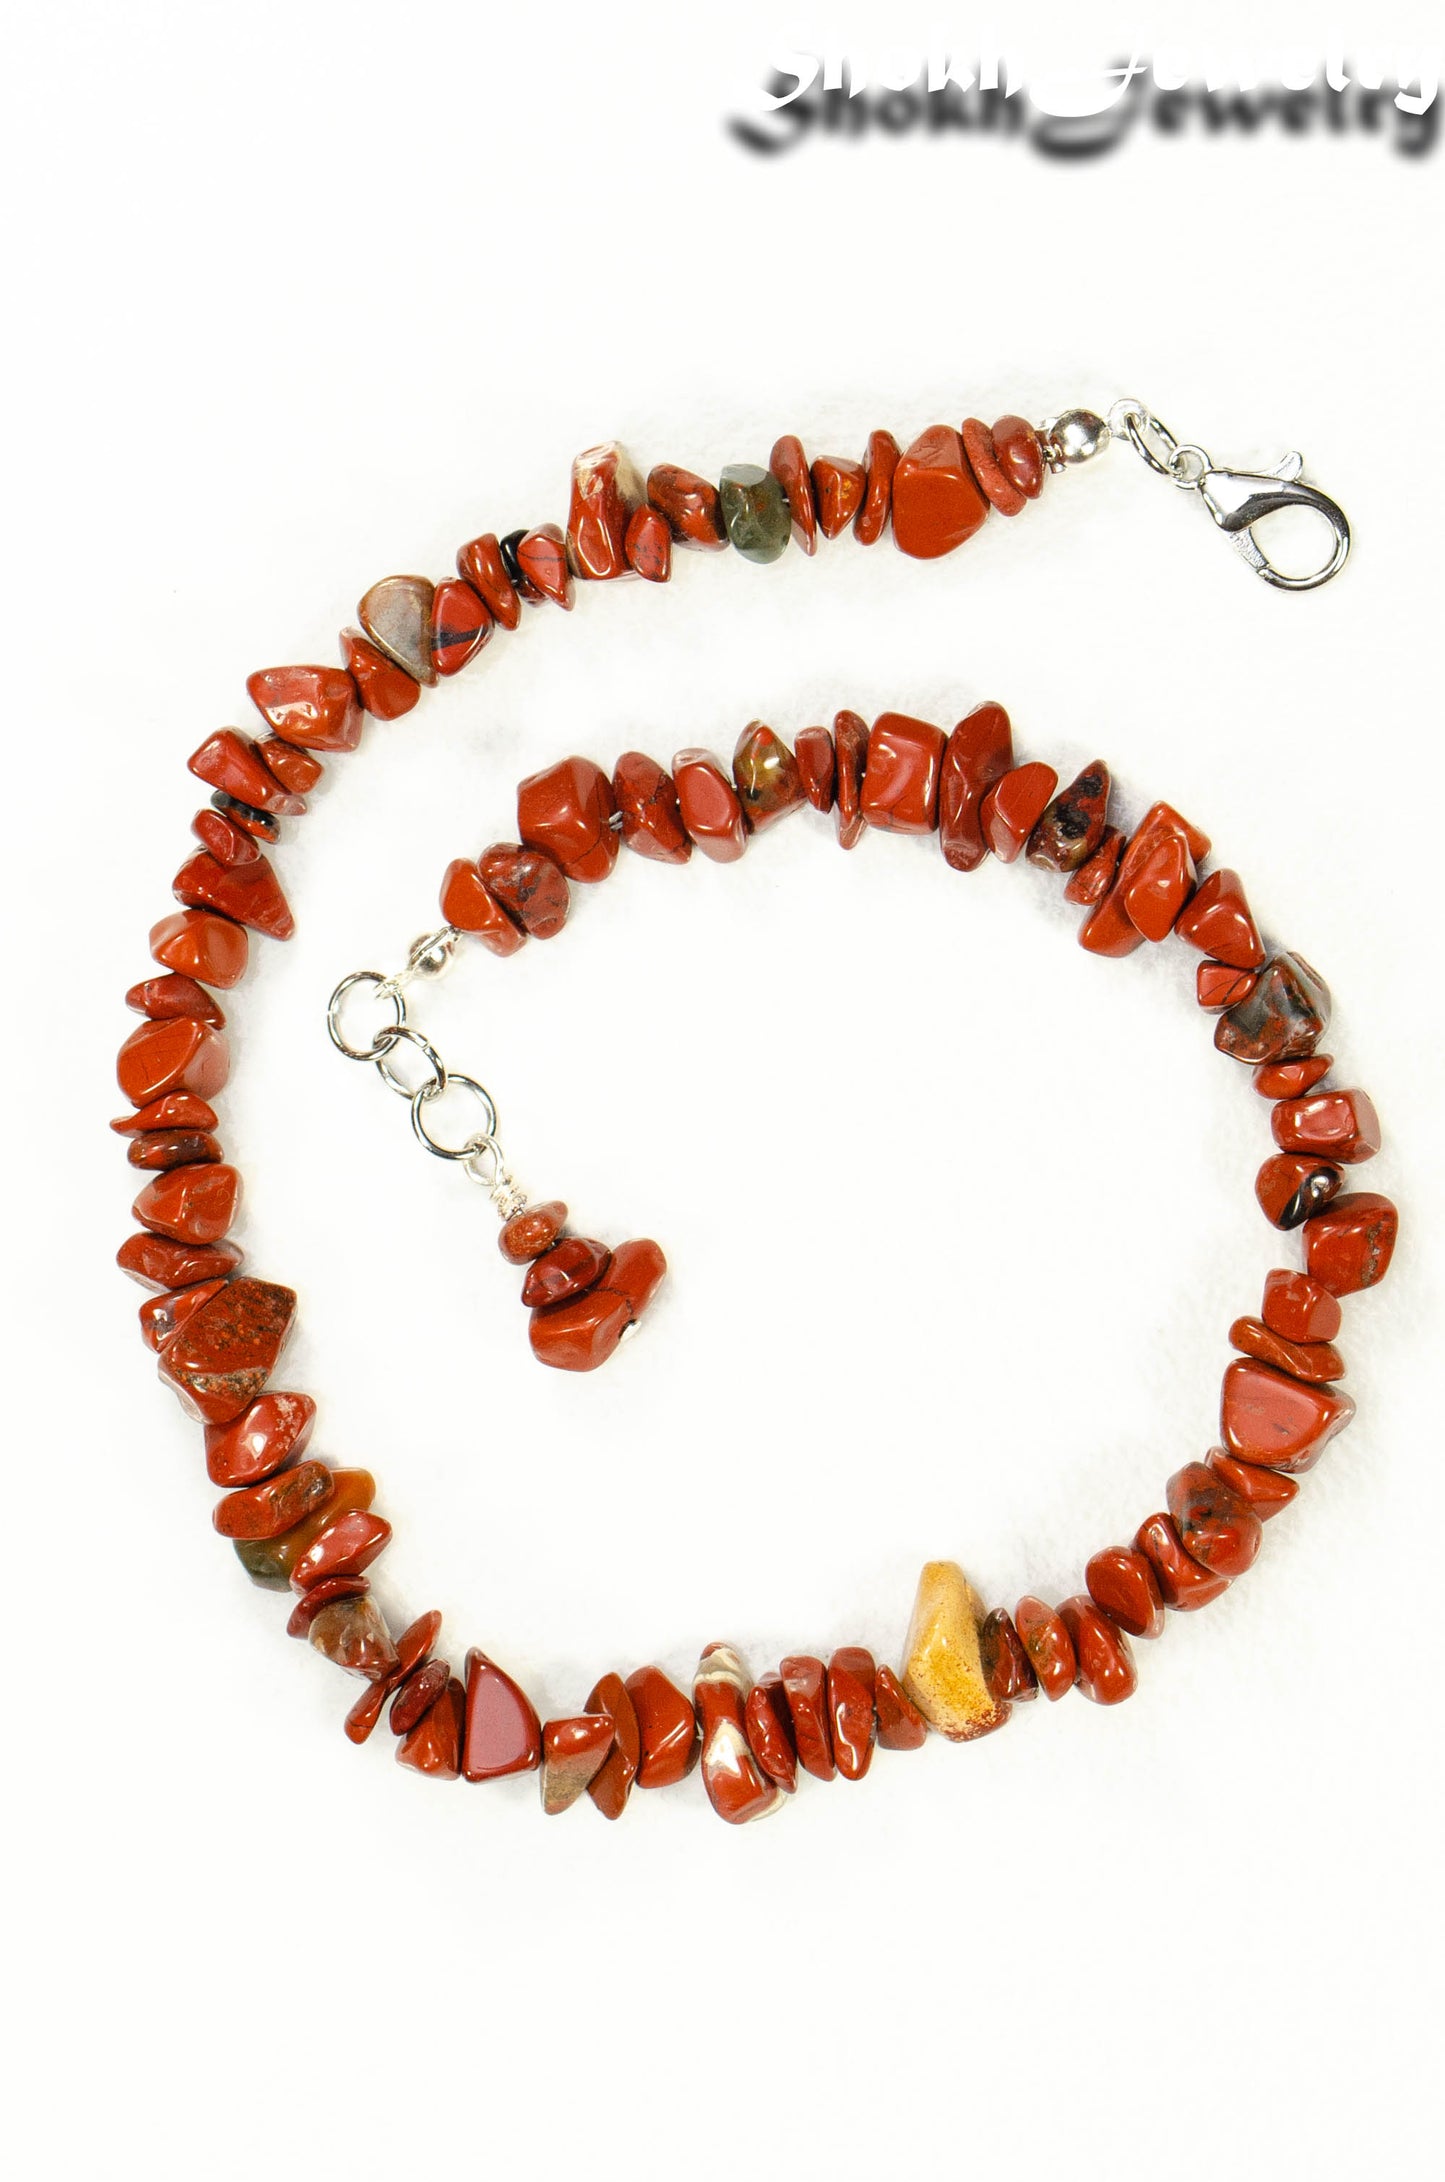 Top view of Natural Red Jasper Crystal Chip Choker Necklace.